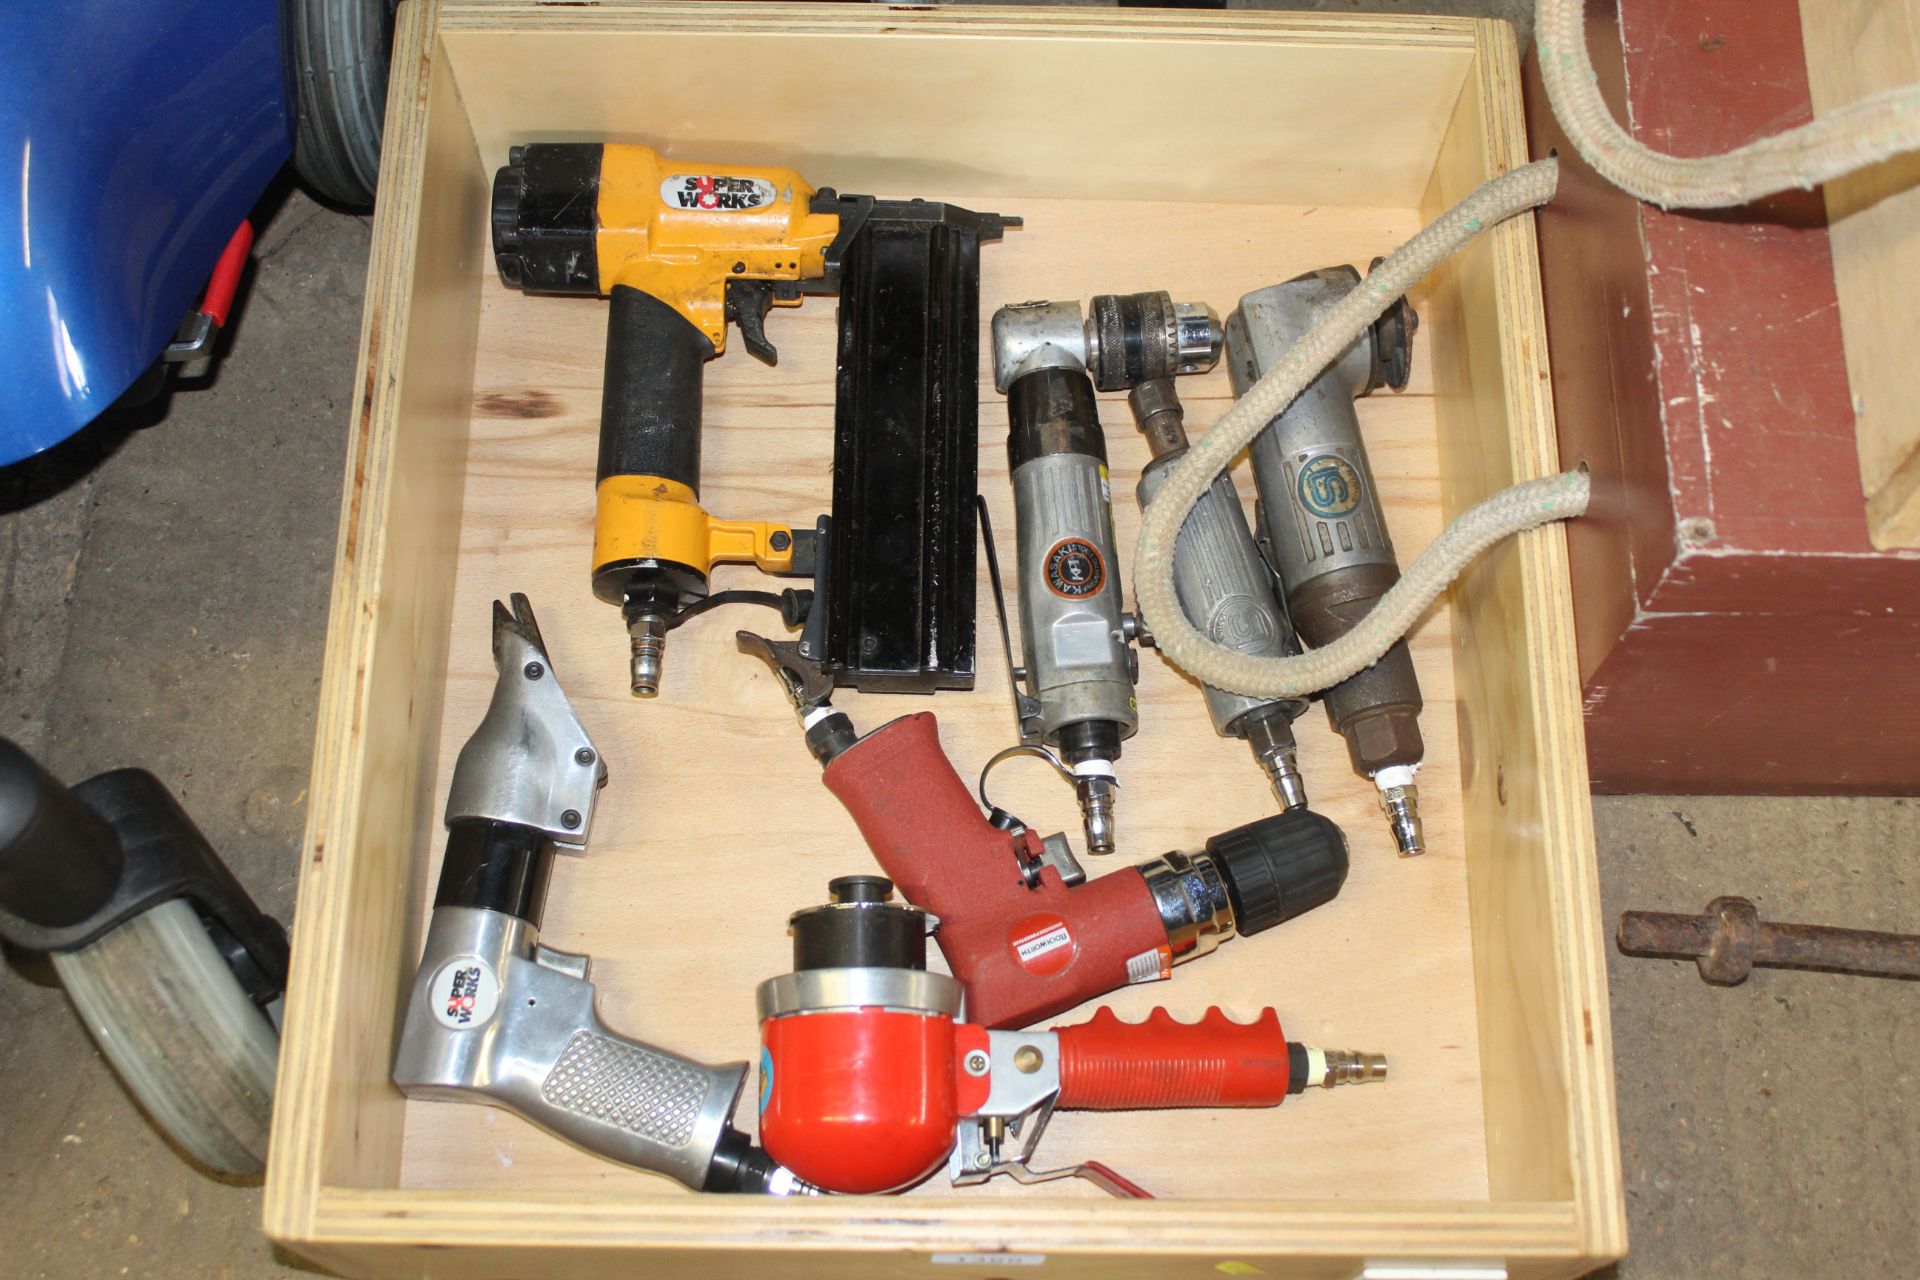 A wooden tray and contents of various air powered